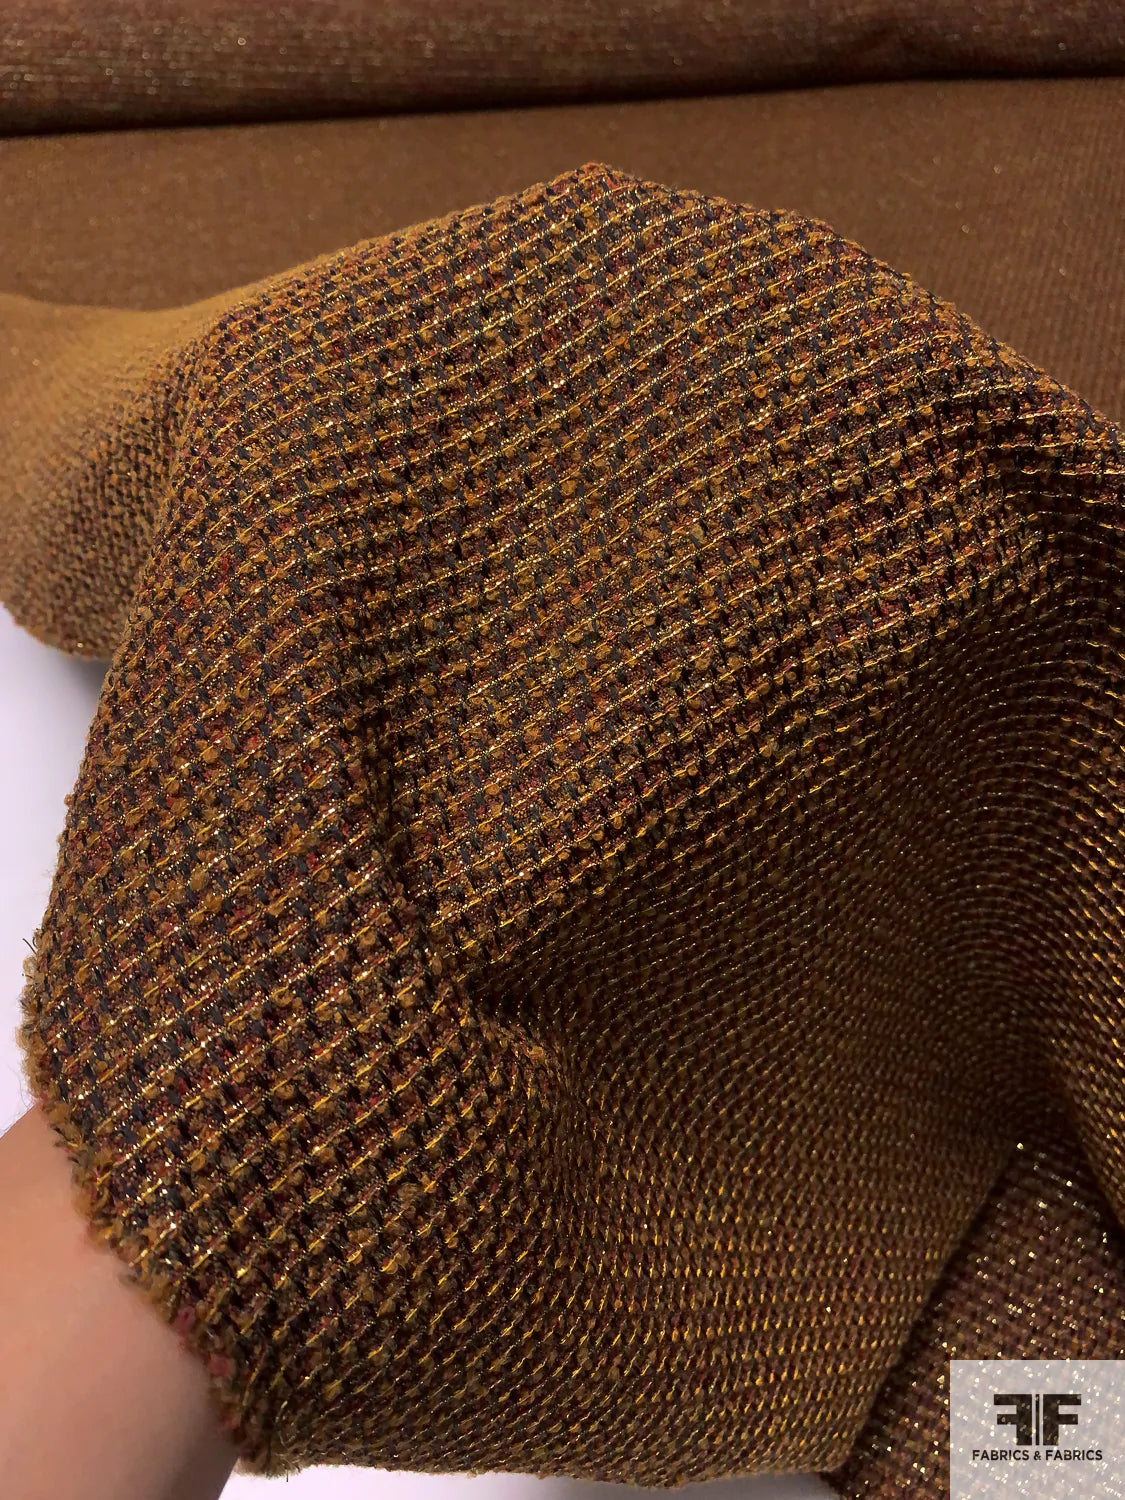 Italian Glam Wool Blend Tweed Suiting with Lurex Fibers - Brown / Saddle / Cranberry / Gold